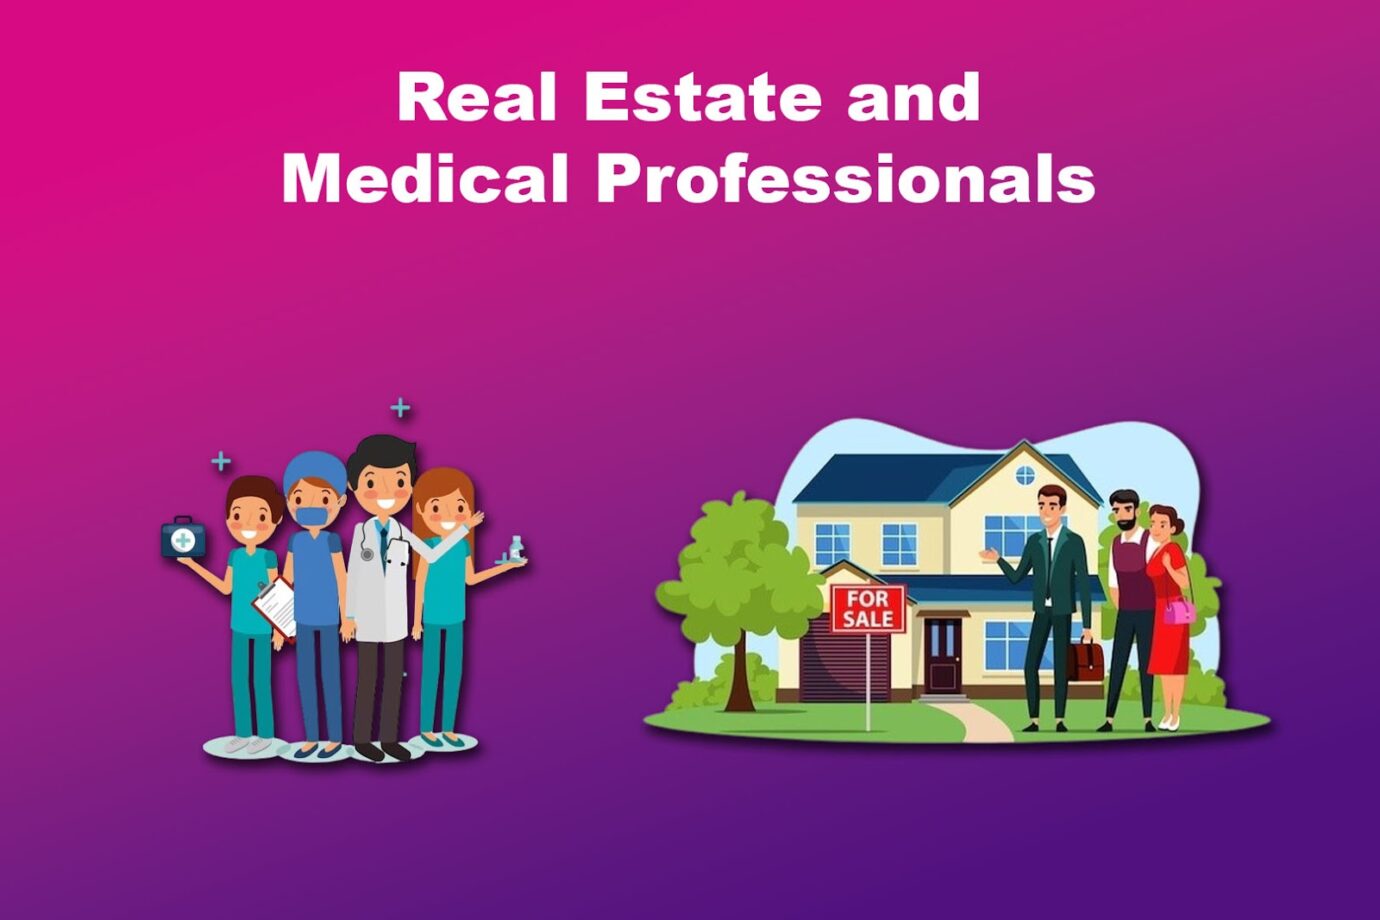 Virtual Assistants for Real Estate and Medical Professionals